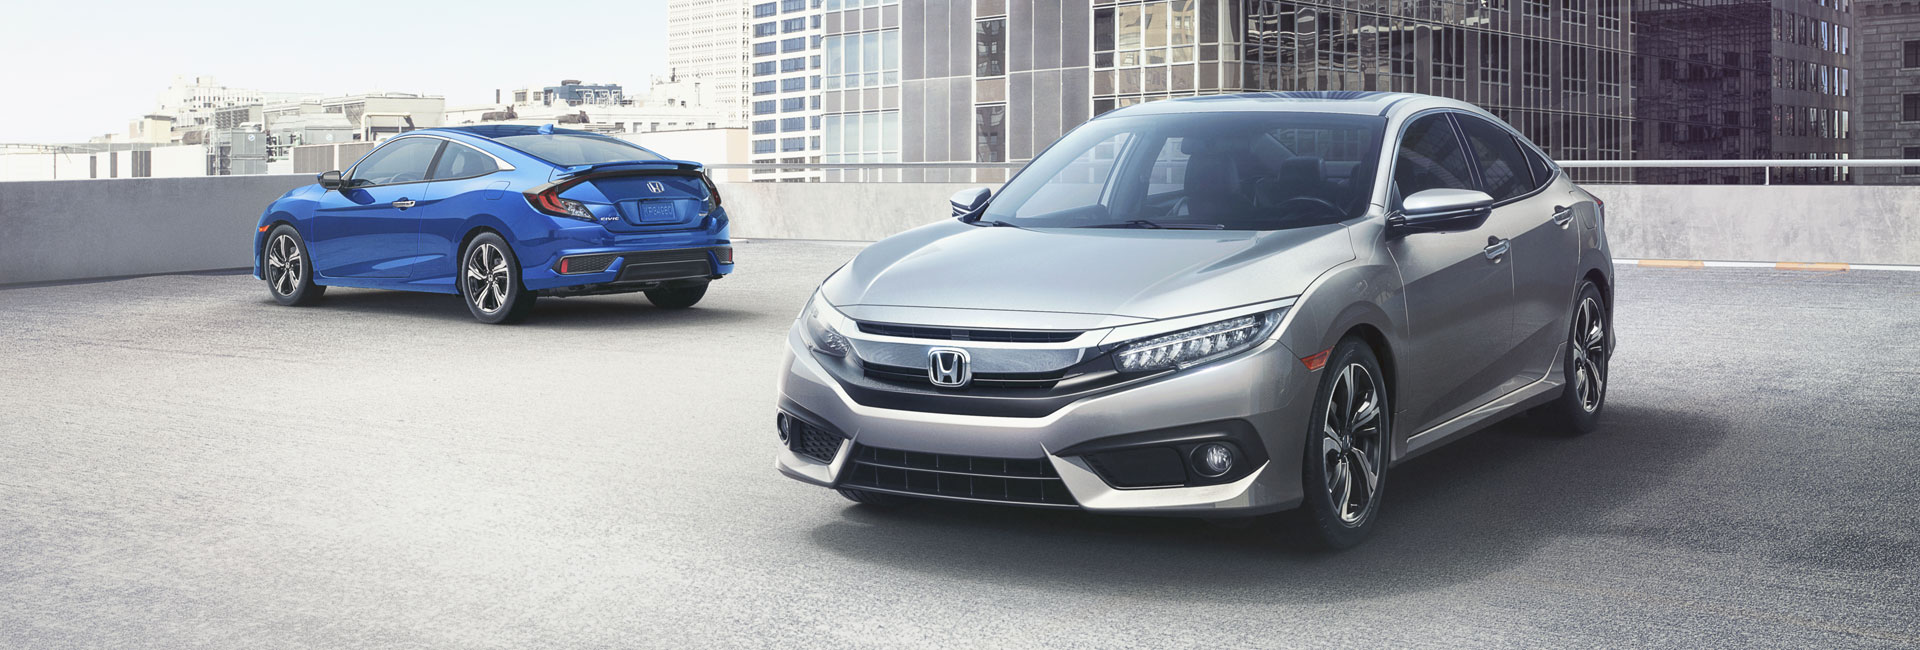 Two 2017 Honda Civic Coupes with Gray and Blue Exterior